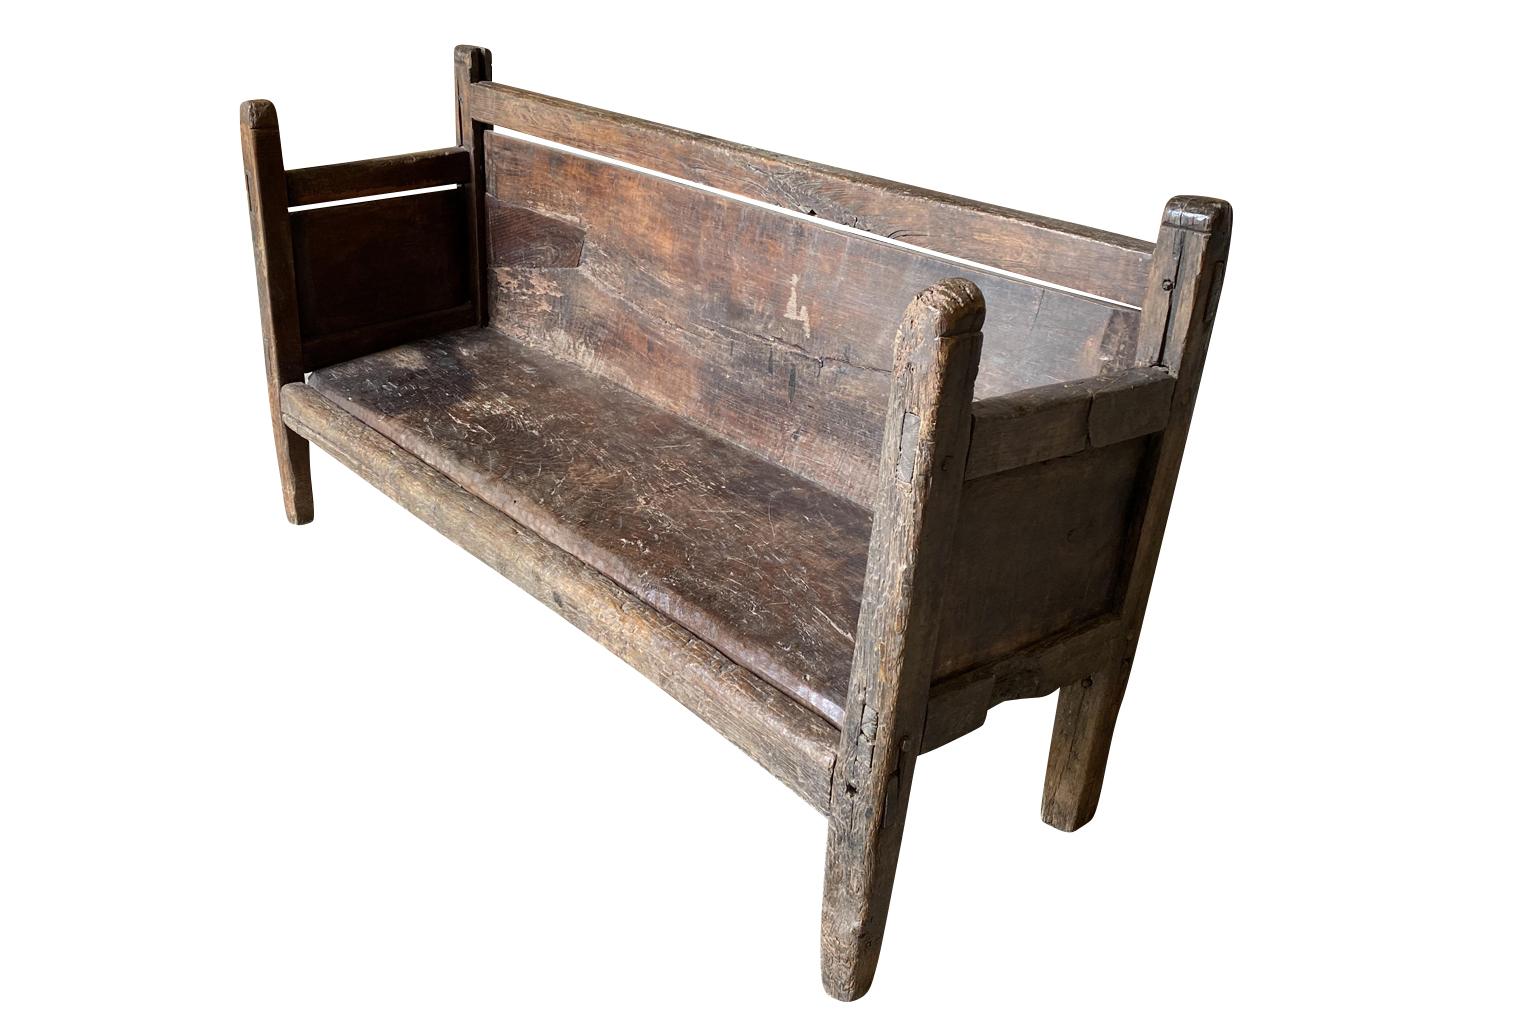 A very charming 17th century bench from the Southwest region of France. Beautifully constructed with solid boards of beautifully stained oak. A stunning bench with gorgeous patina.